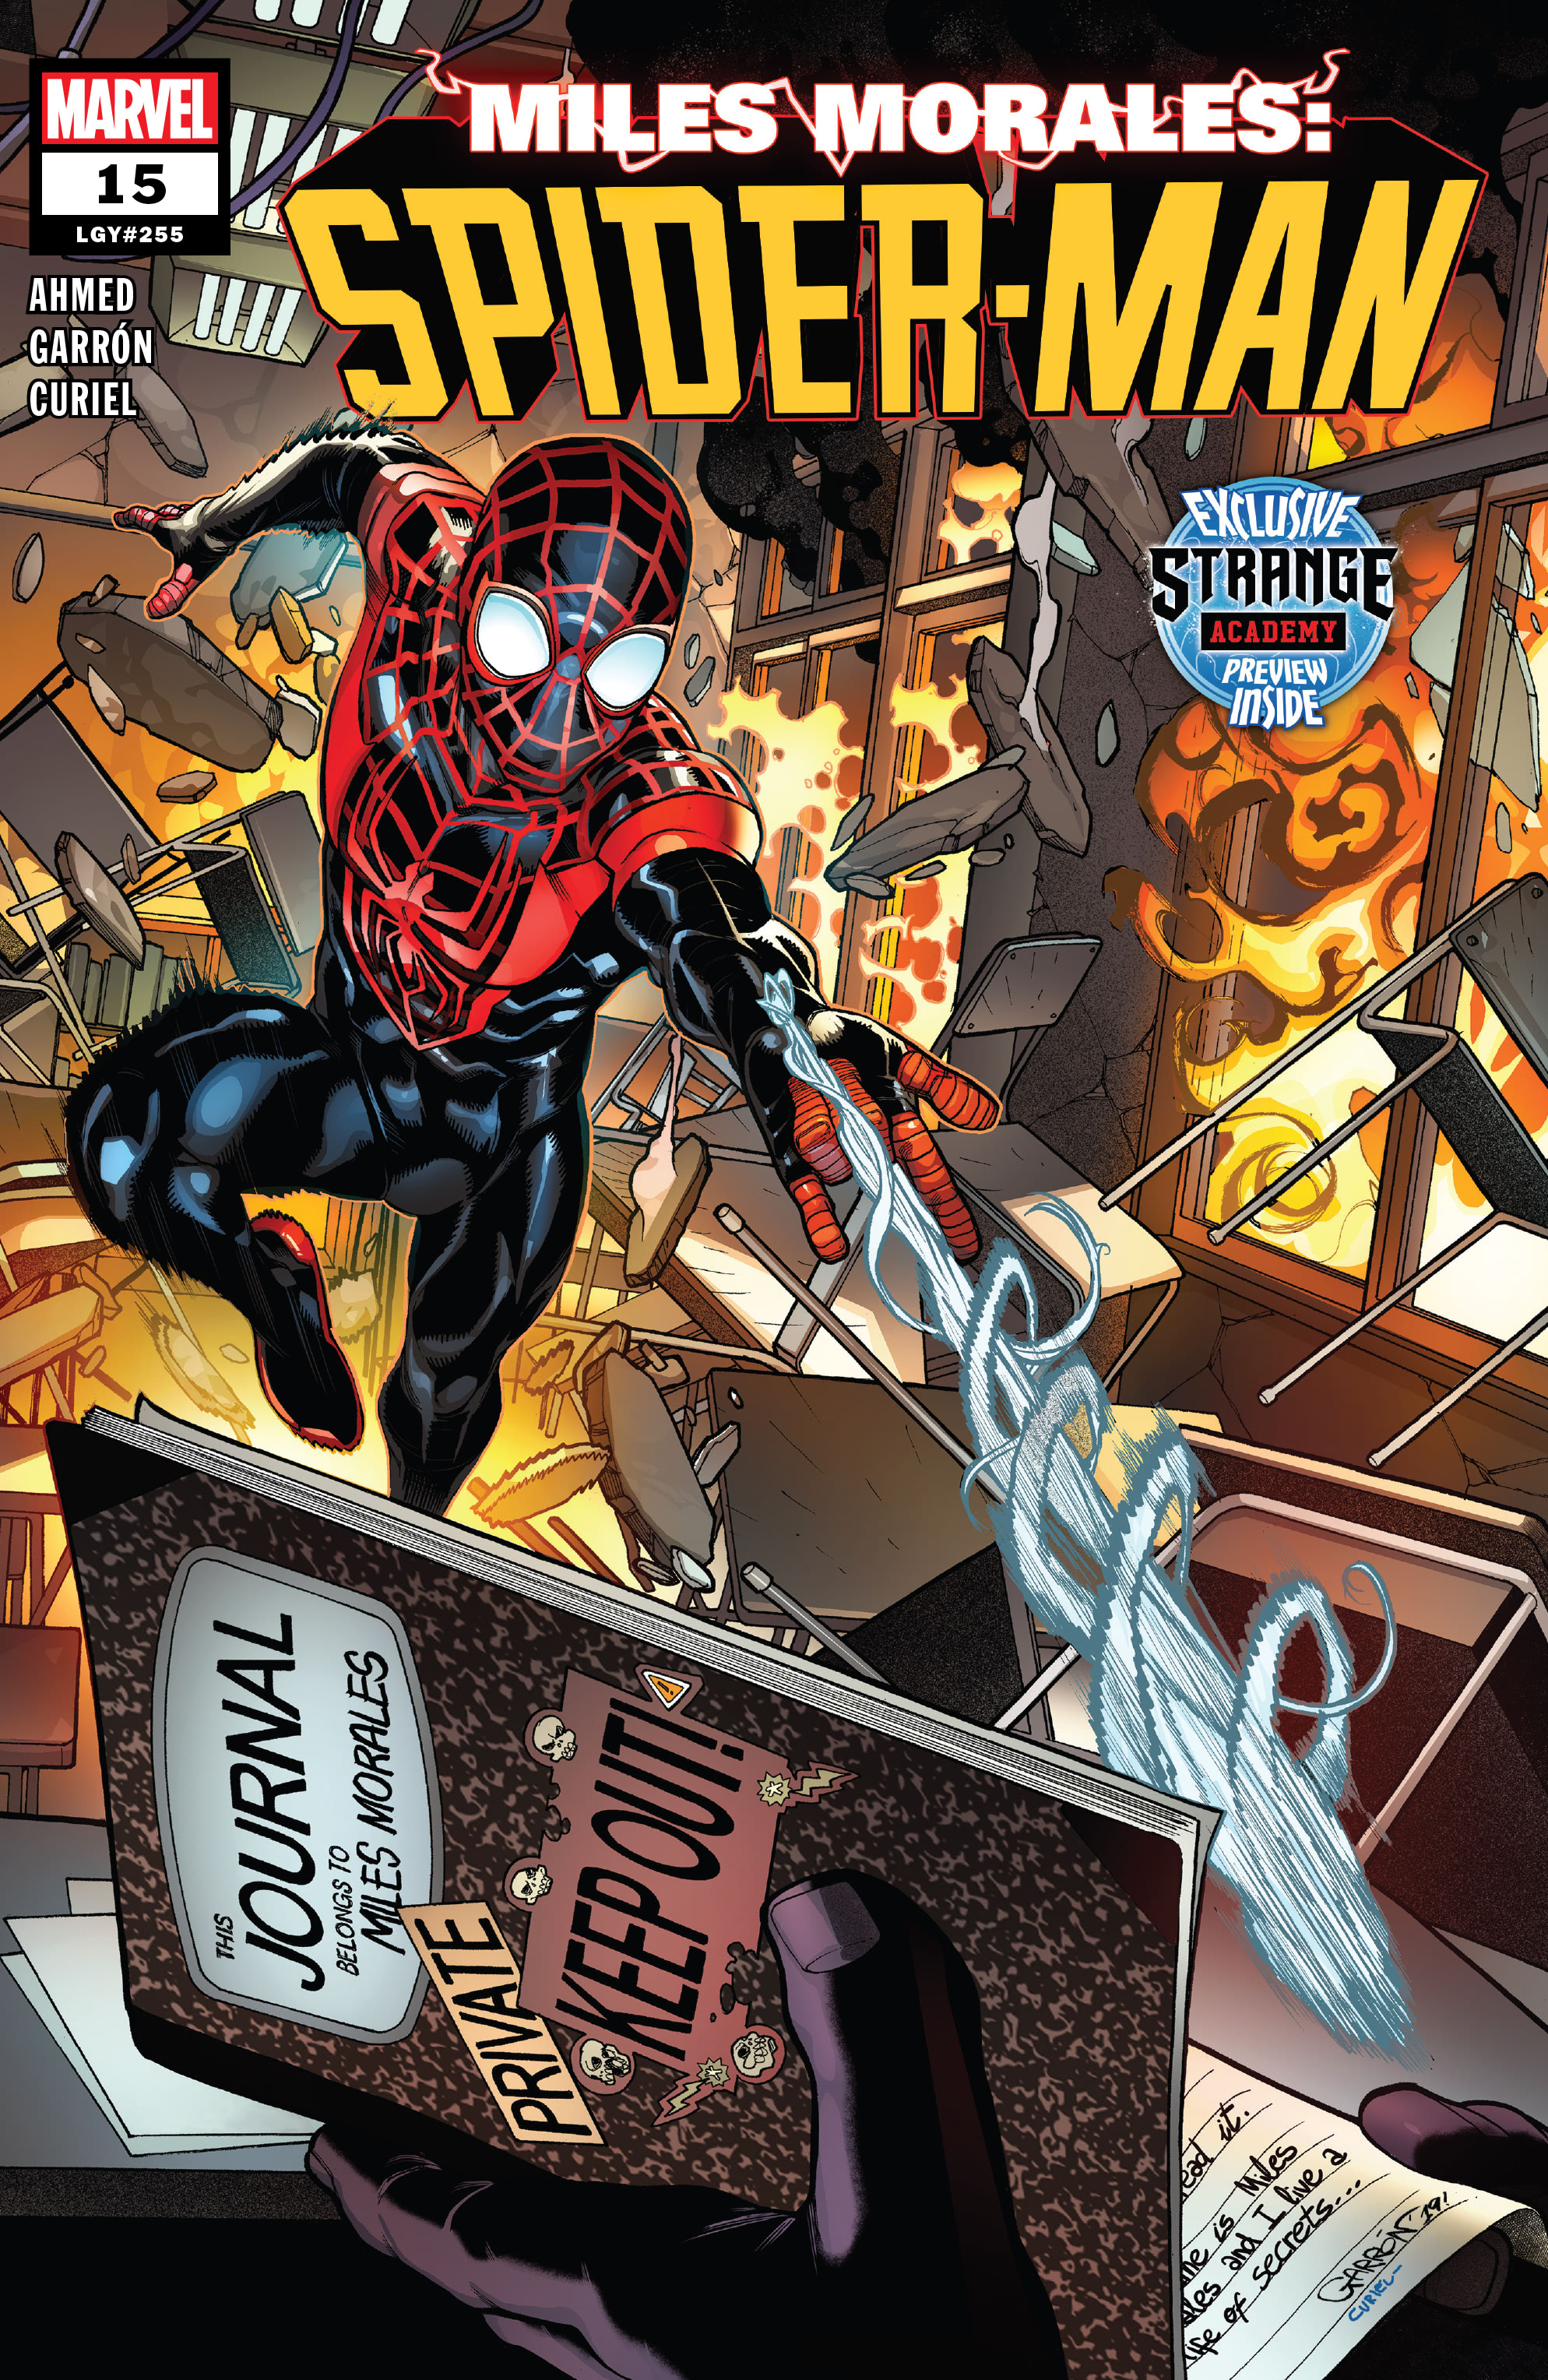 Read online Miles Morales: Spider-Man comic -  Issue #15 - 1